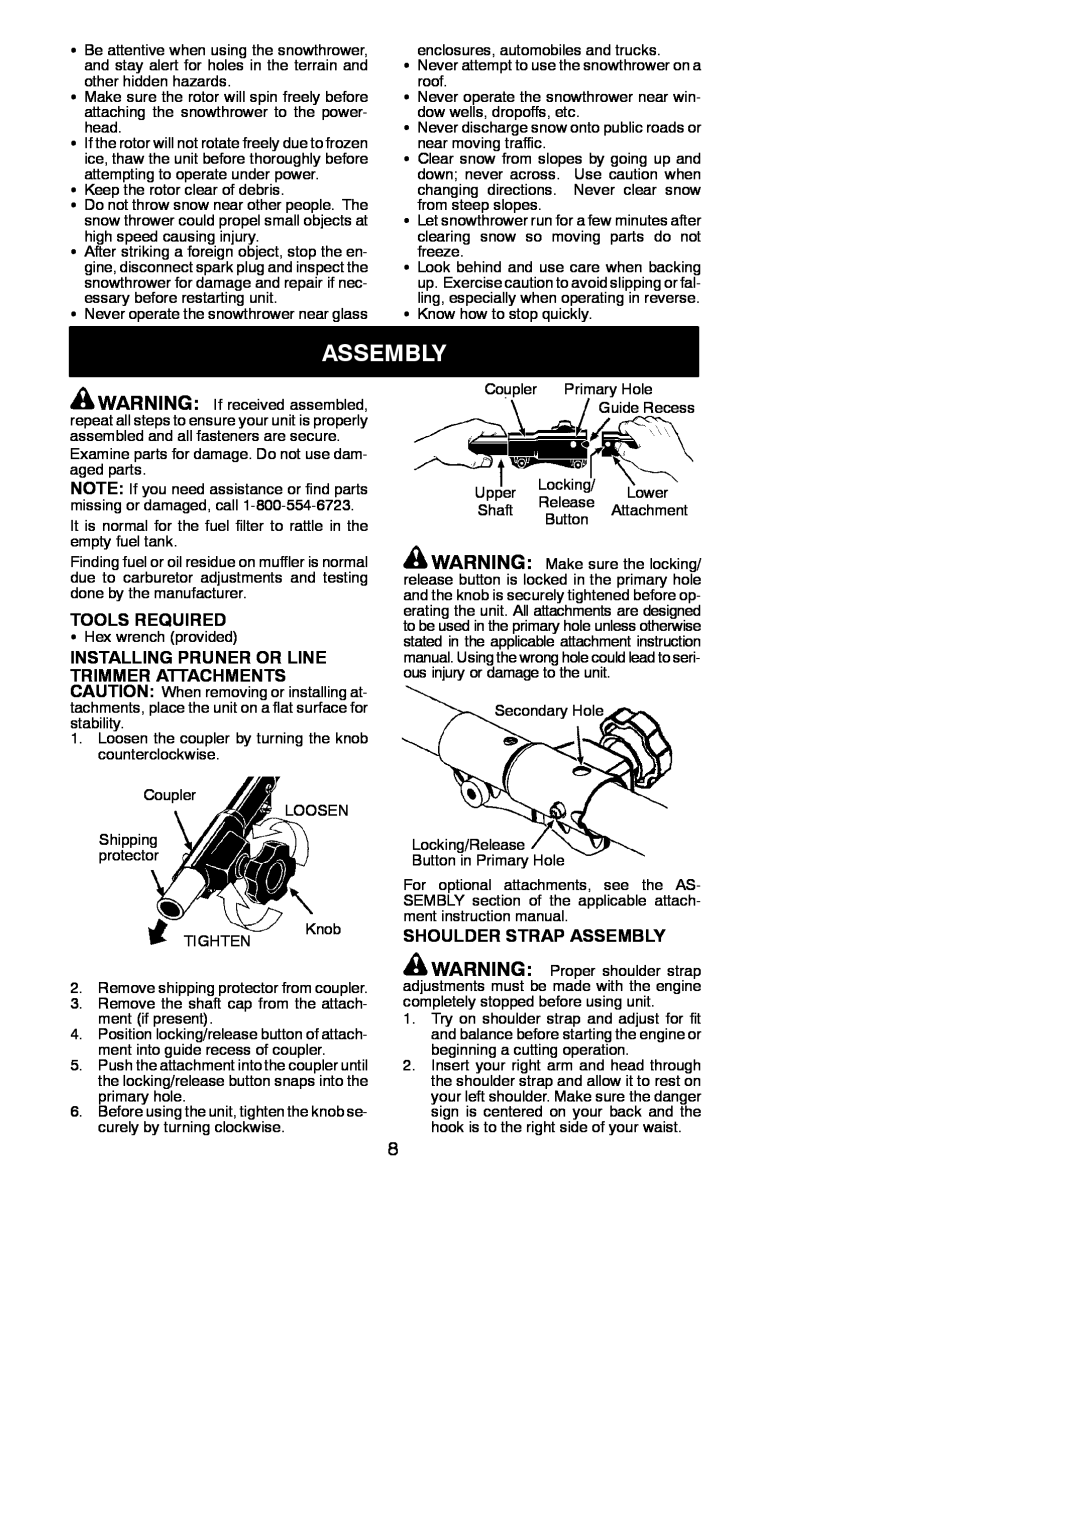 Poulan 952711882, PP46ET instruction manual Tools Required, Shoulder Strap Assembly 